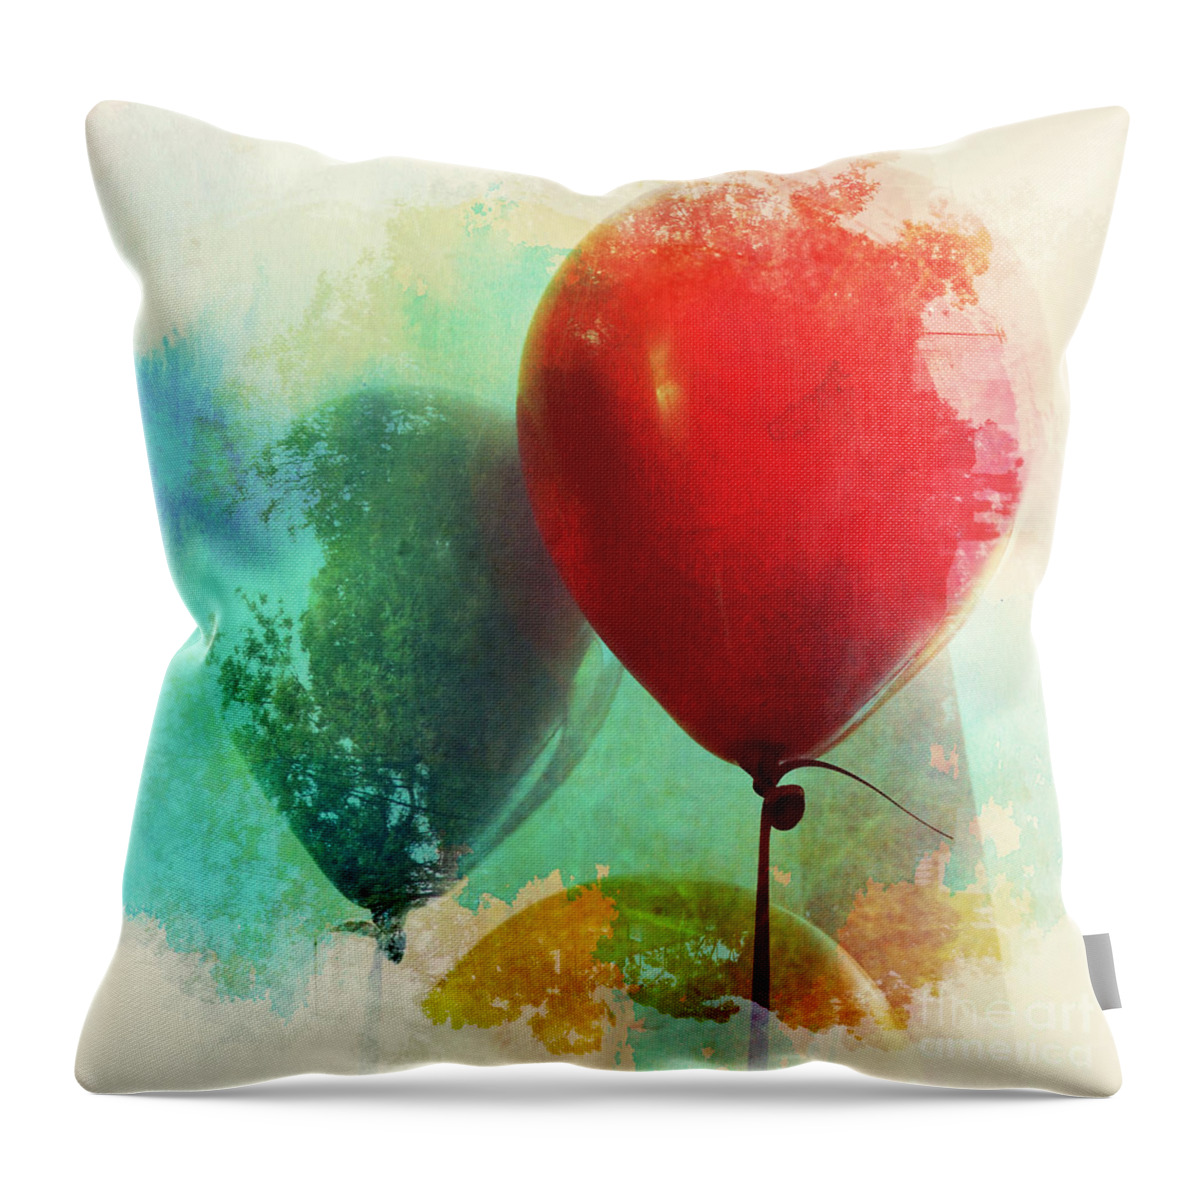 Balloons Throw Pillow featuring the photograph Ballooneria by Onedayoneimage Photography